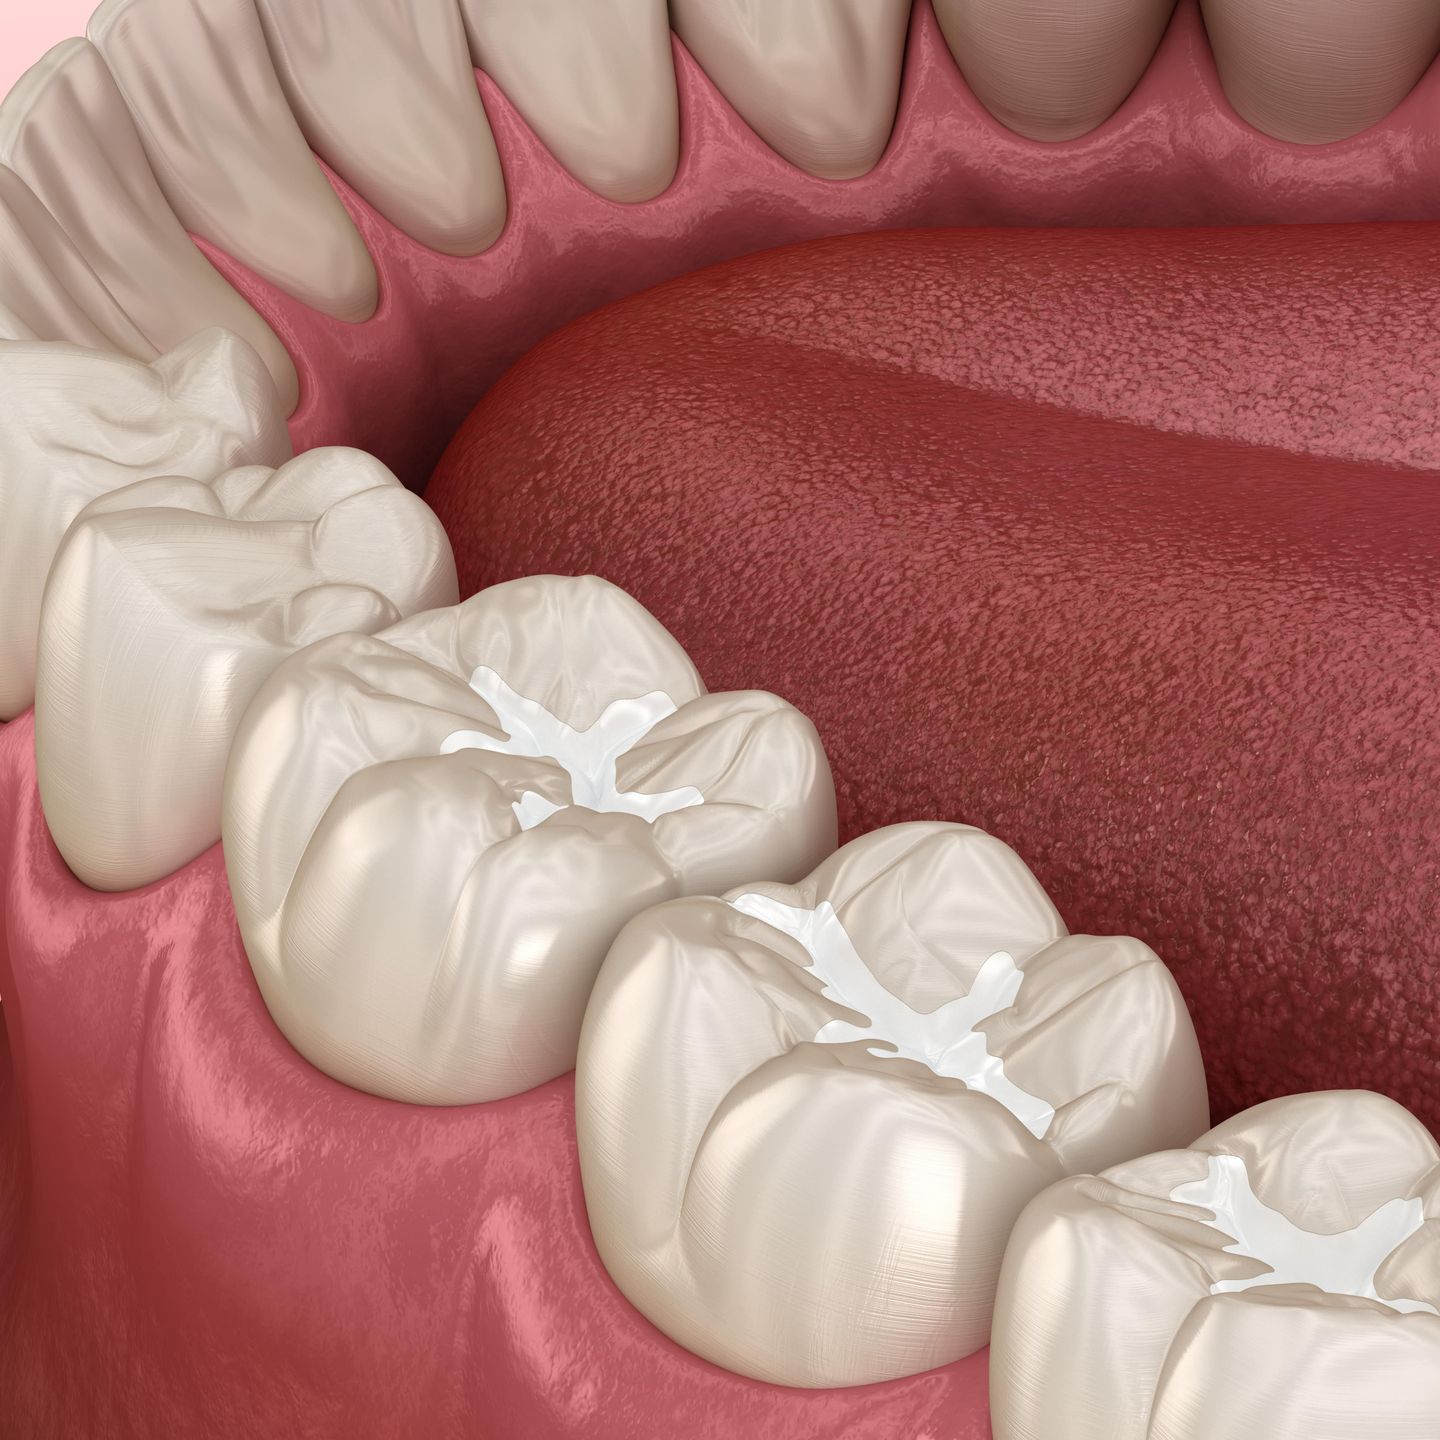 A computer generated of teeth with dental sealants